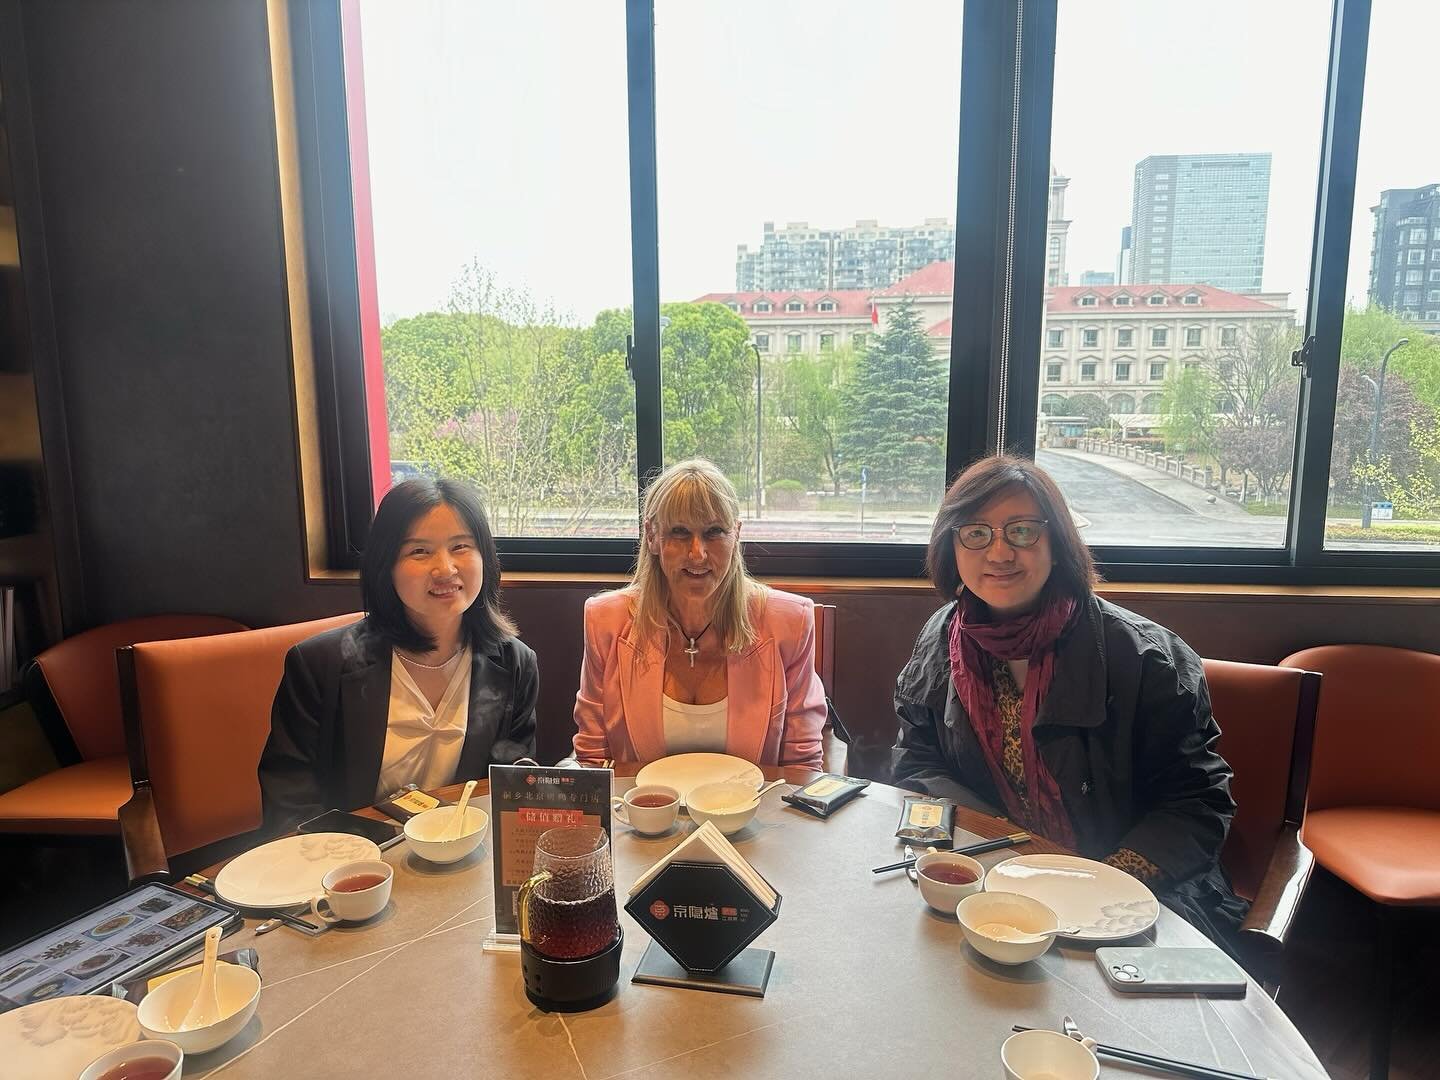 Chinese lunch with one of our oldest suppliers. We have built a great friendship and partnership for the past 15 years.

#tfs #supplier #dinner #fashionsource #produce #production #managing #shanghai